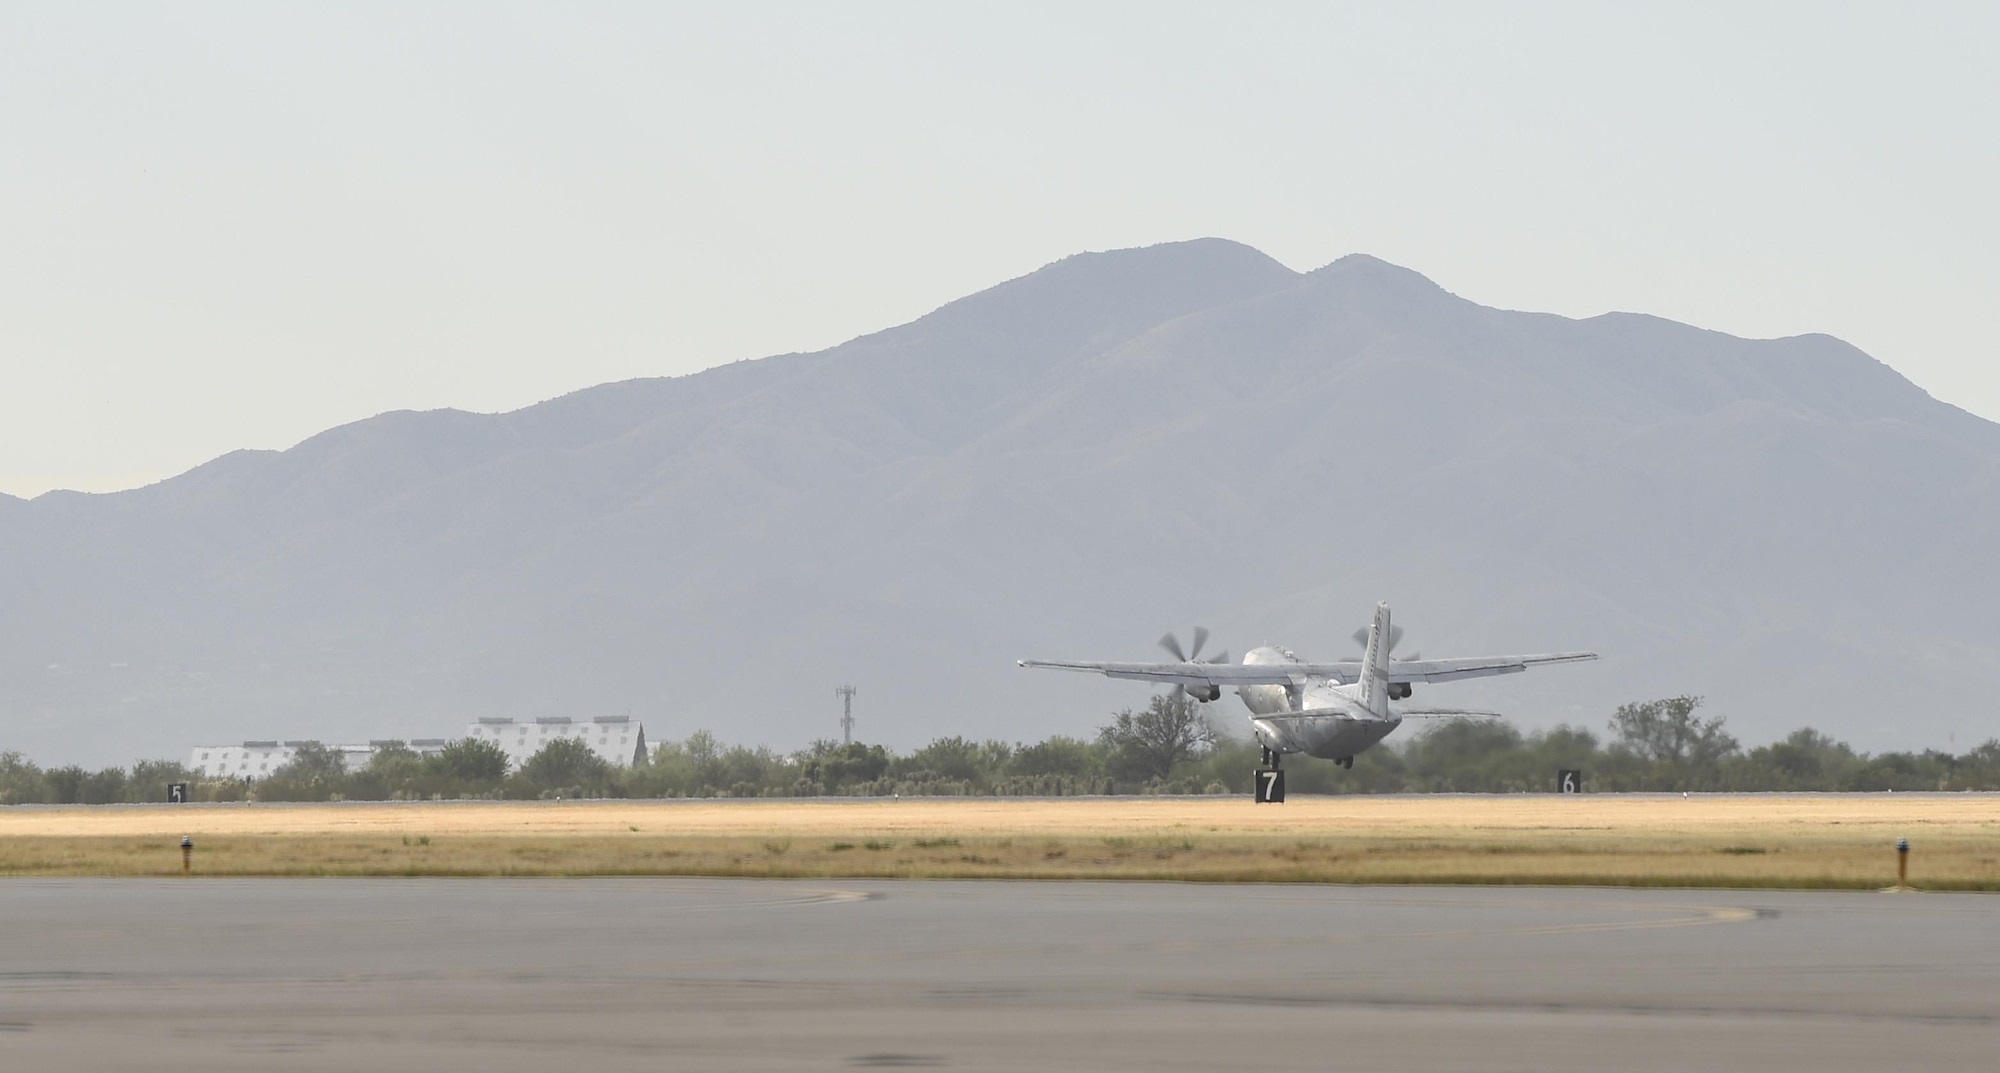 A C-27J Spartan departs from Davis-Monthan Air Force Base, Oct. 19, 2017. This aircraft was the last of 13 C-27Js which were regenerated from the 309th Aerospace Maintenance and Regeneration Group at D-M and given to the U.S. Coast Guard. (U.S. Air Force photo by Airman 1st Class Frankie D. Moore)